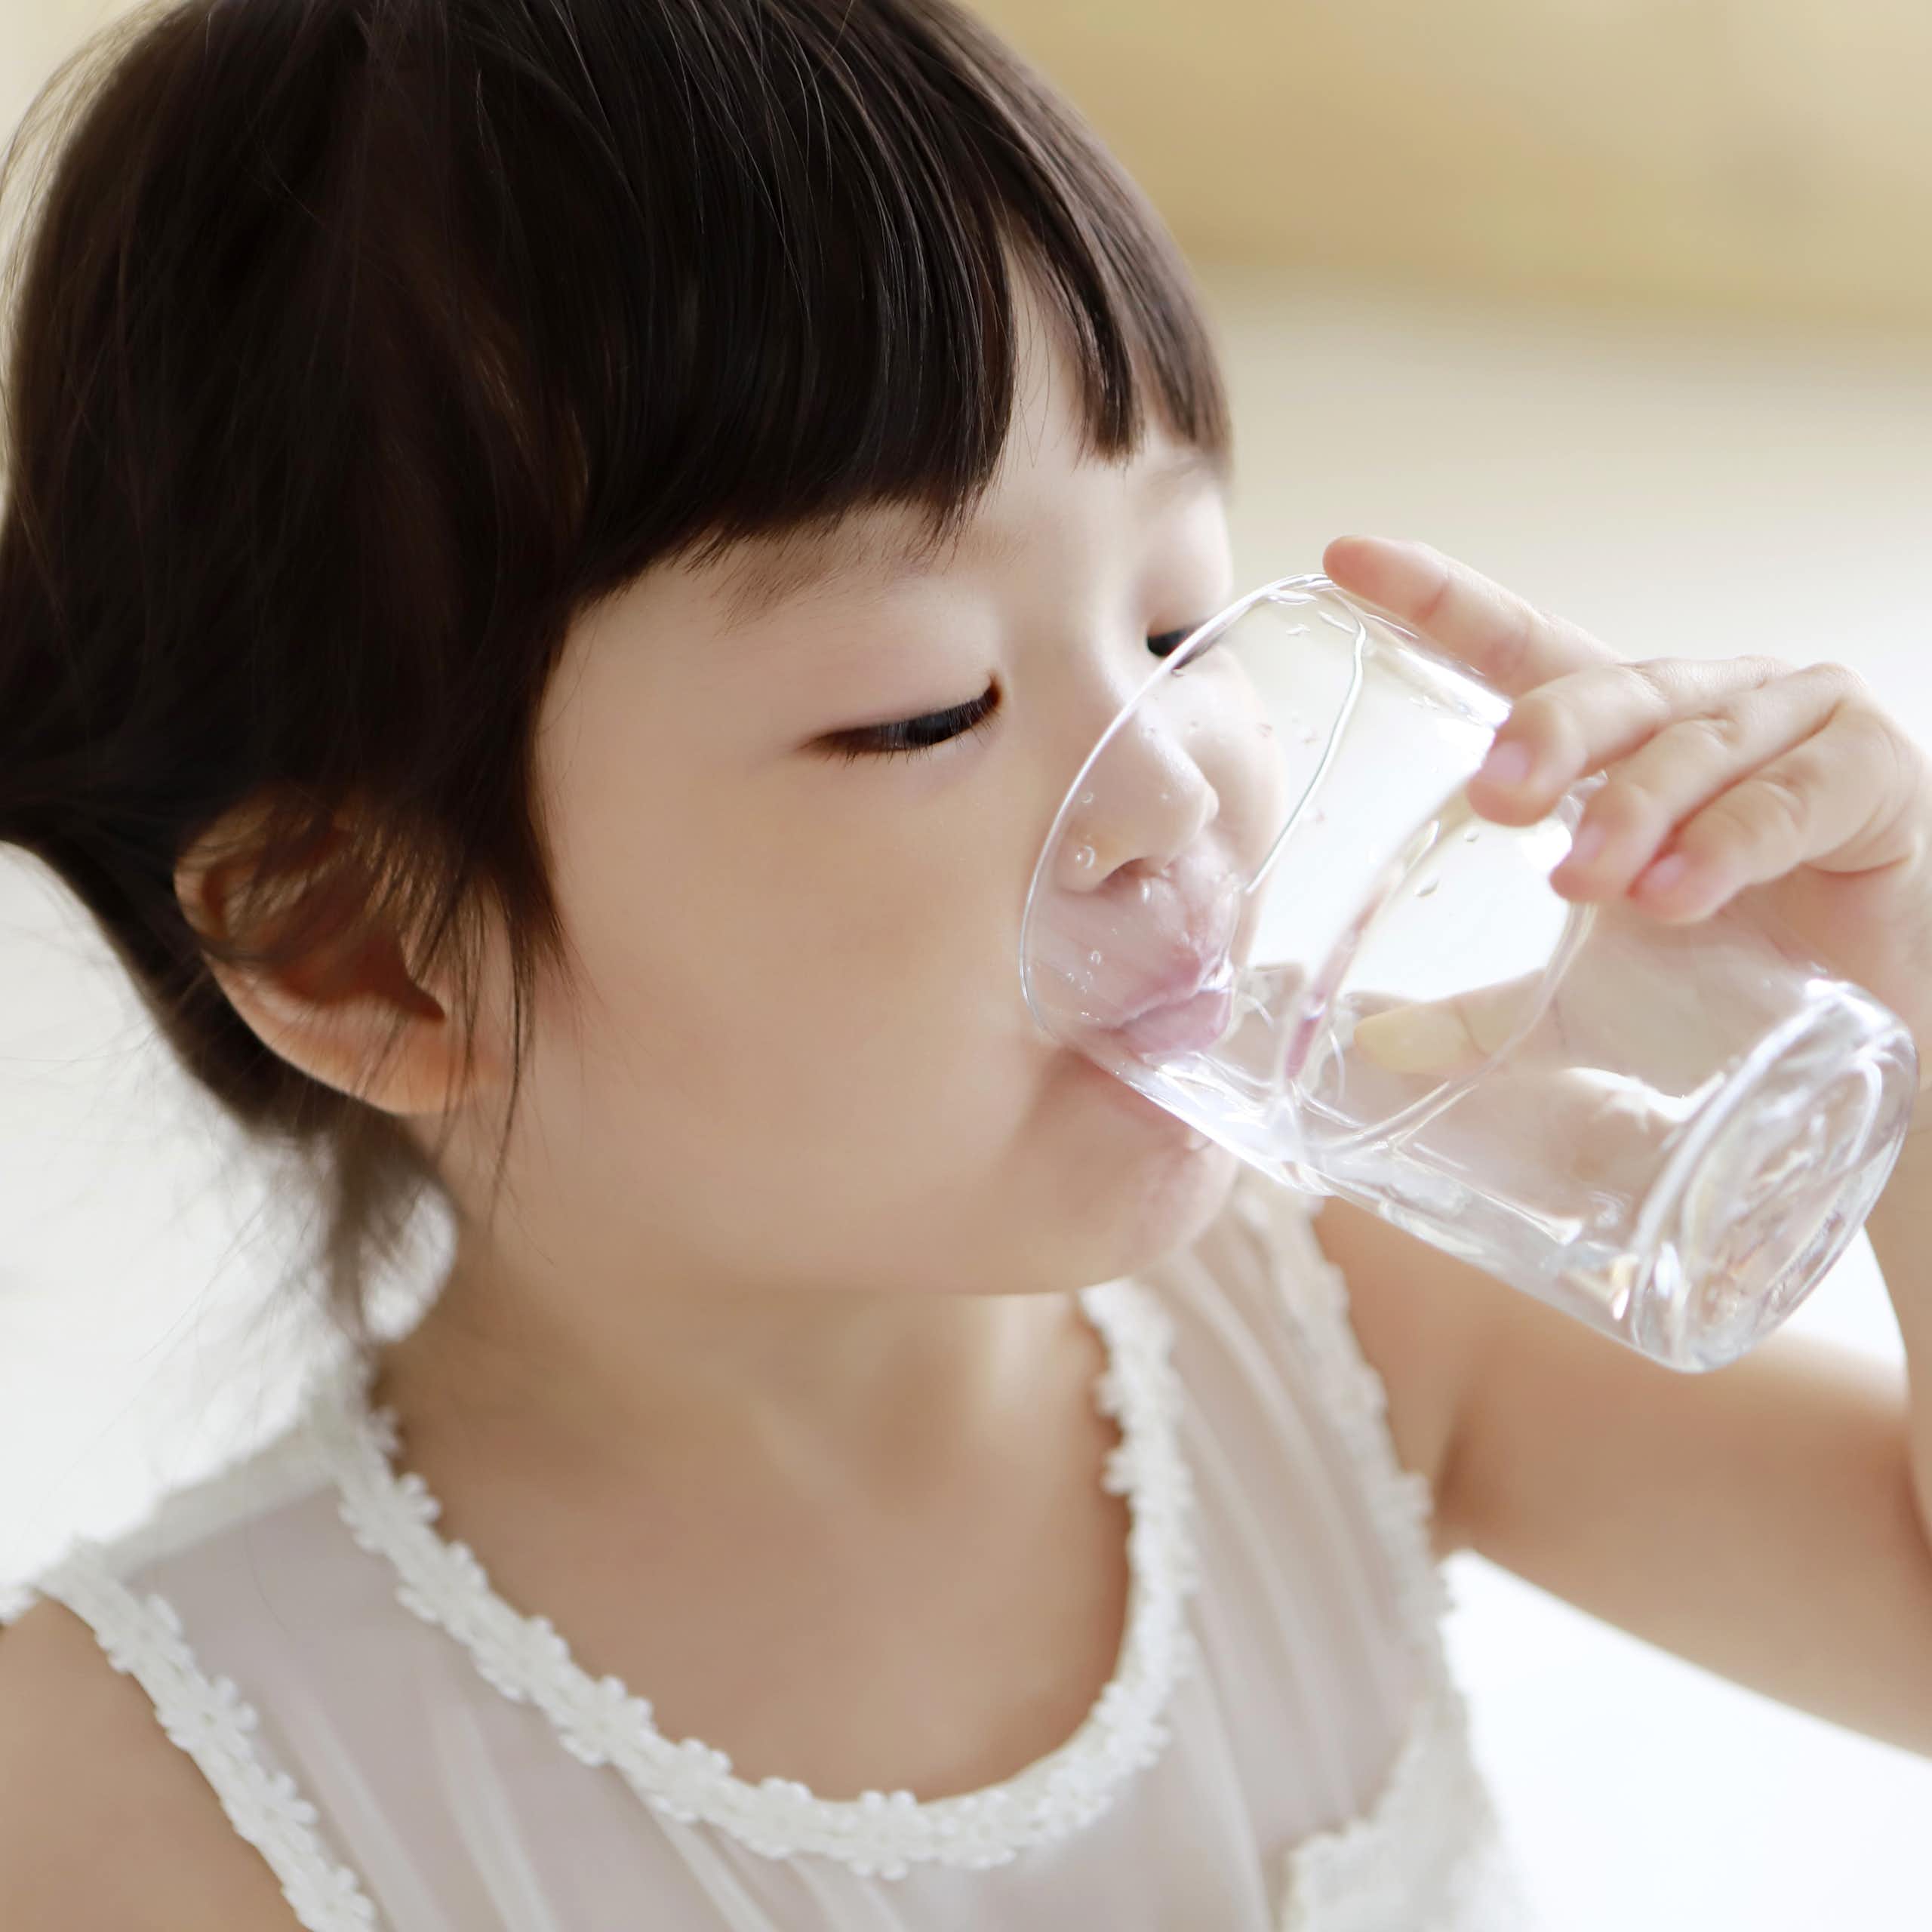 A little girl drinks a glass of water.